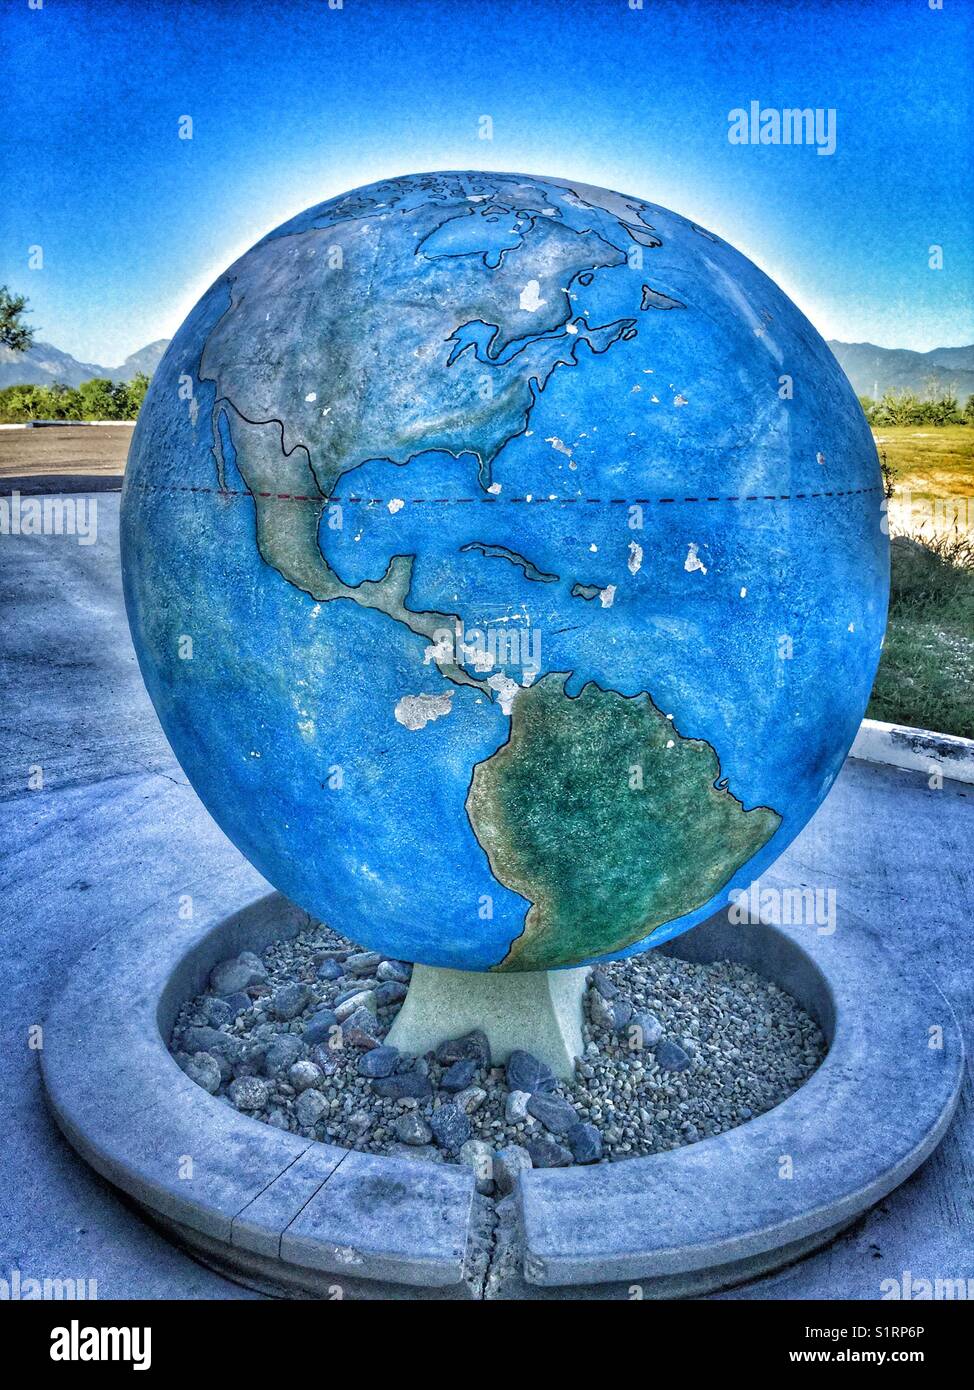 A stone globe sculpture at the Tropic of Cancer in Baja California, Mexico. Stock Photo